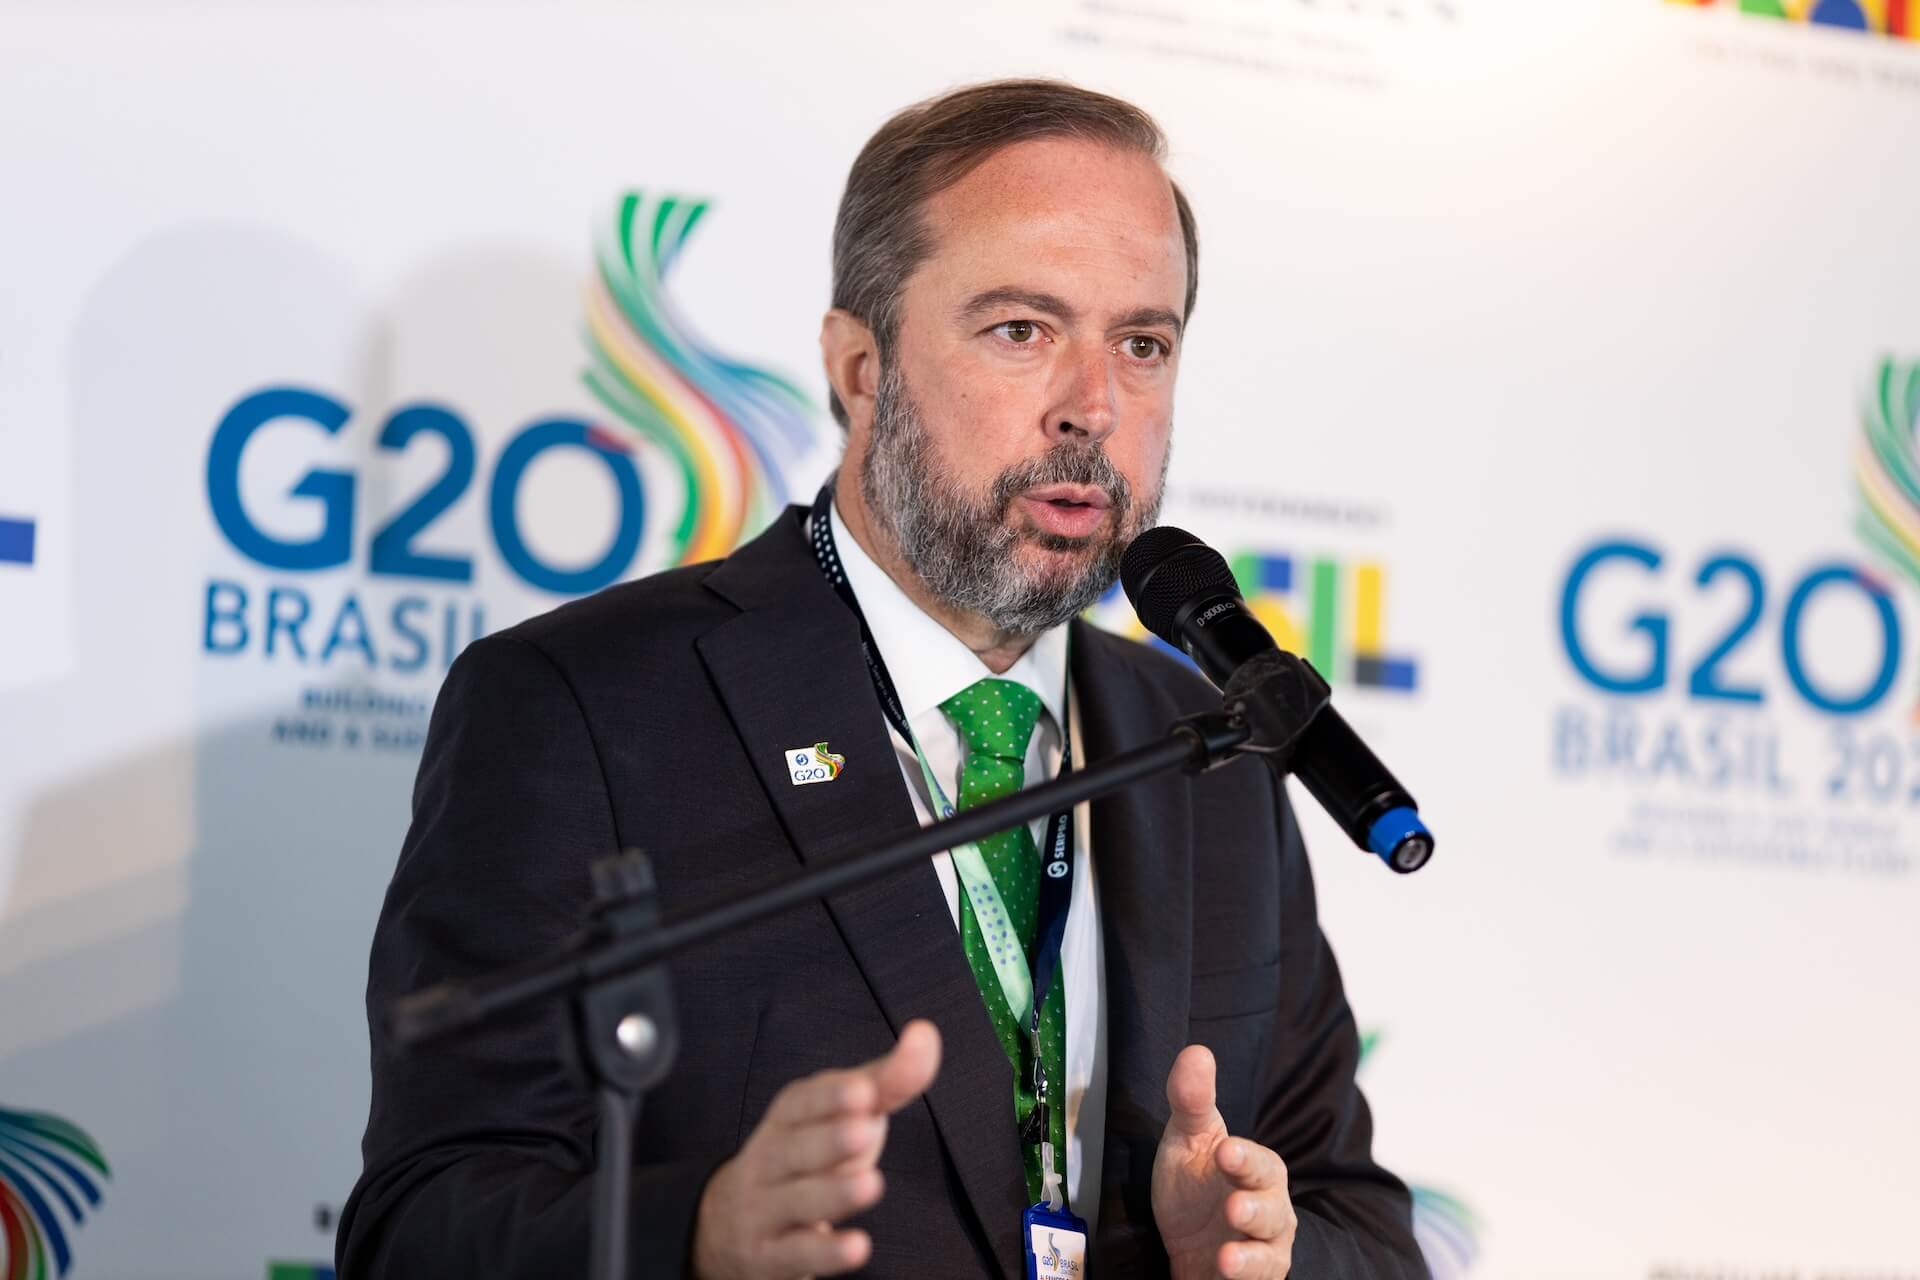 The Minister argues that energy transition requires cooperation between countries. Crédito: Audiovisual G20 Brasil 